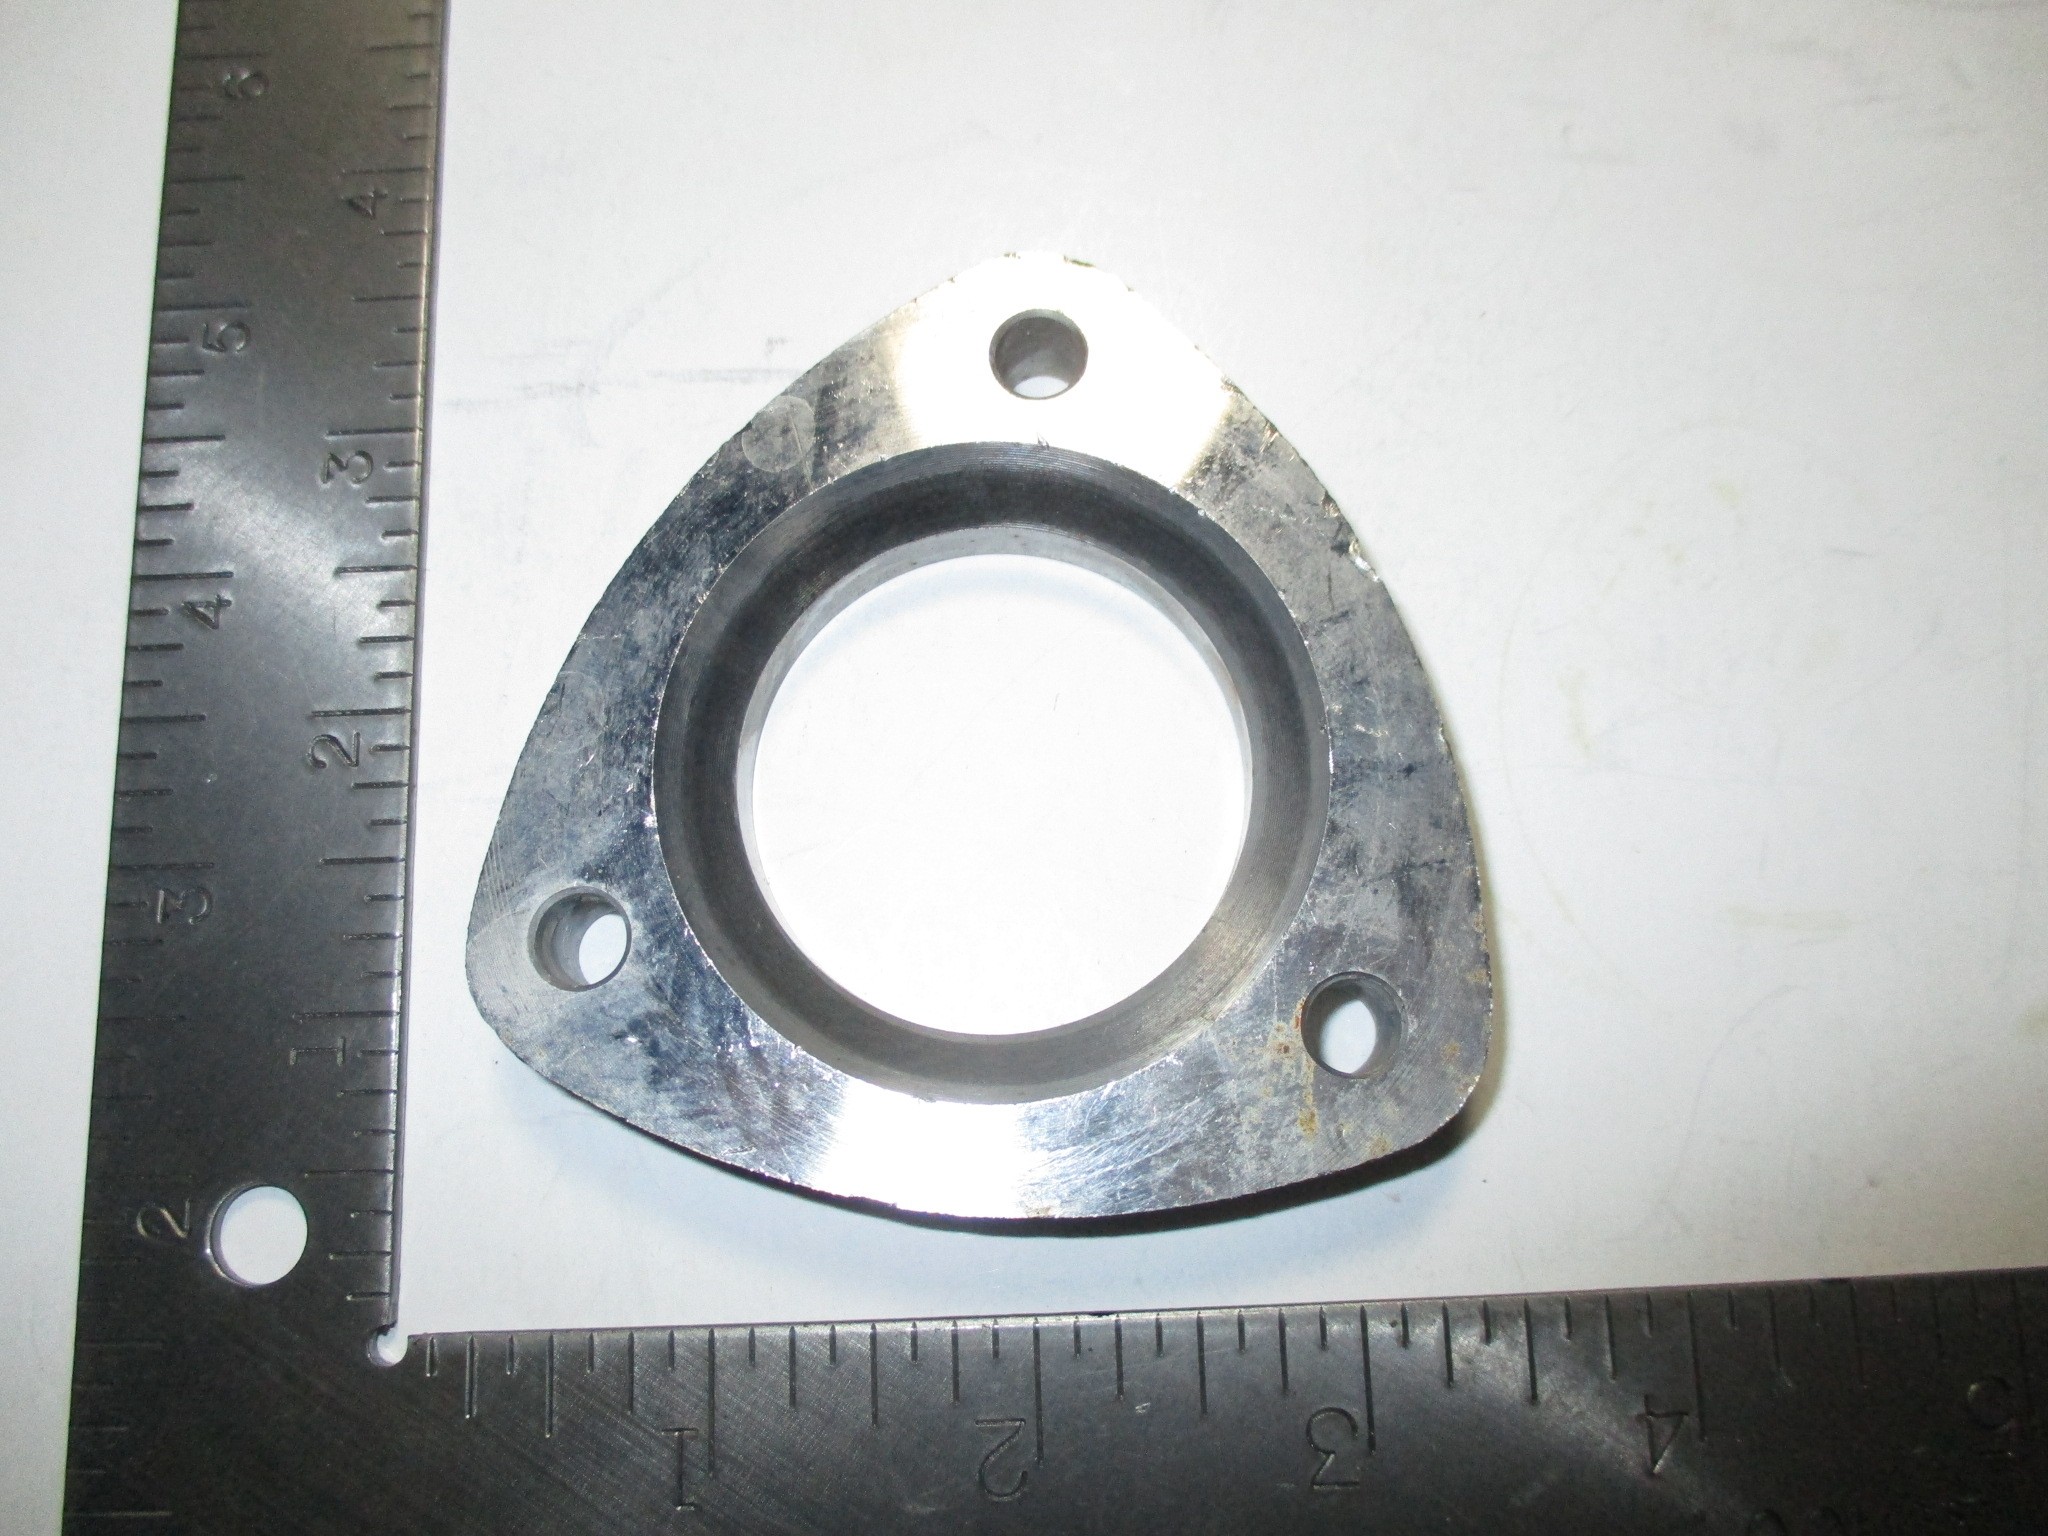 flange for updated waste gate pipe